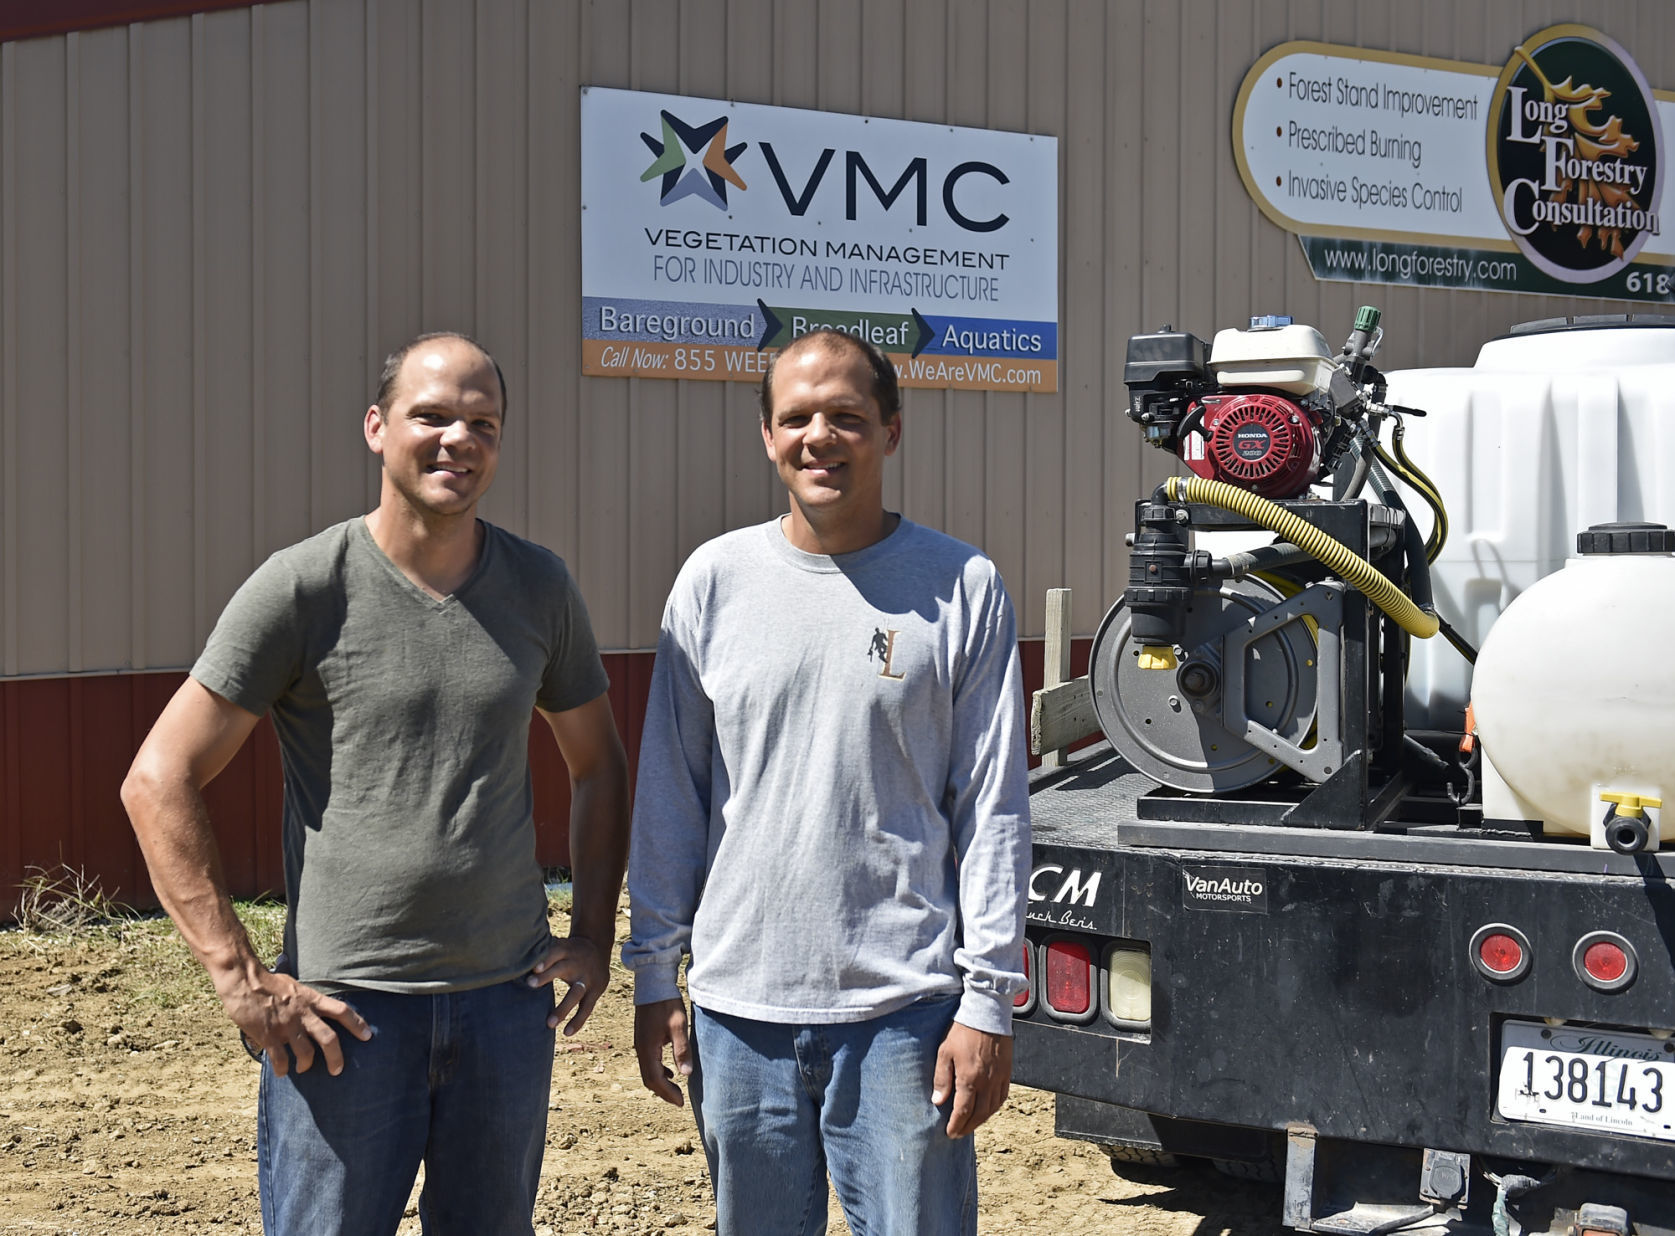 Chris and Mike Long of Vegetation Management